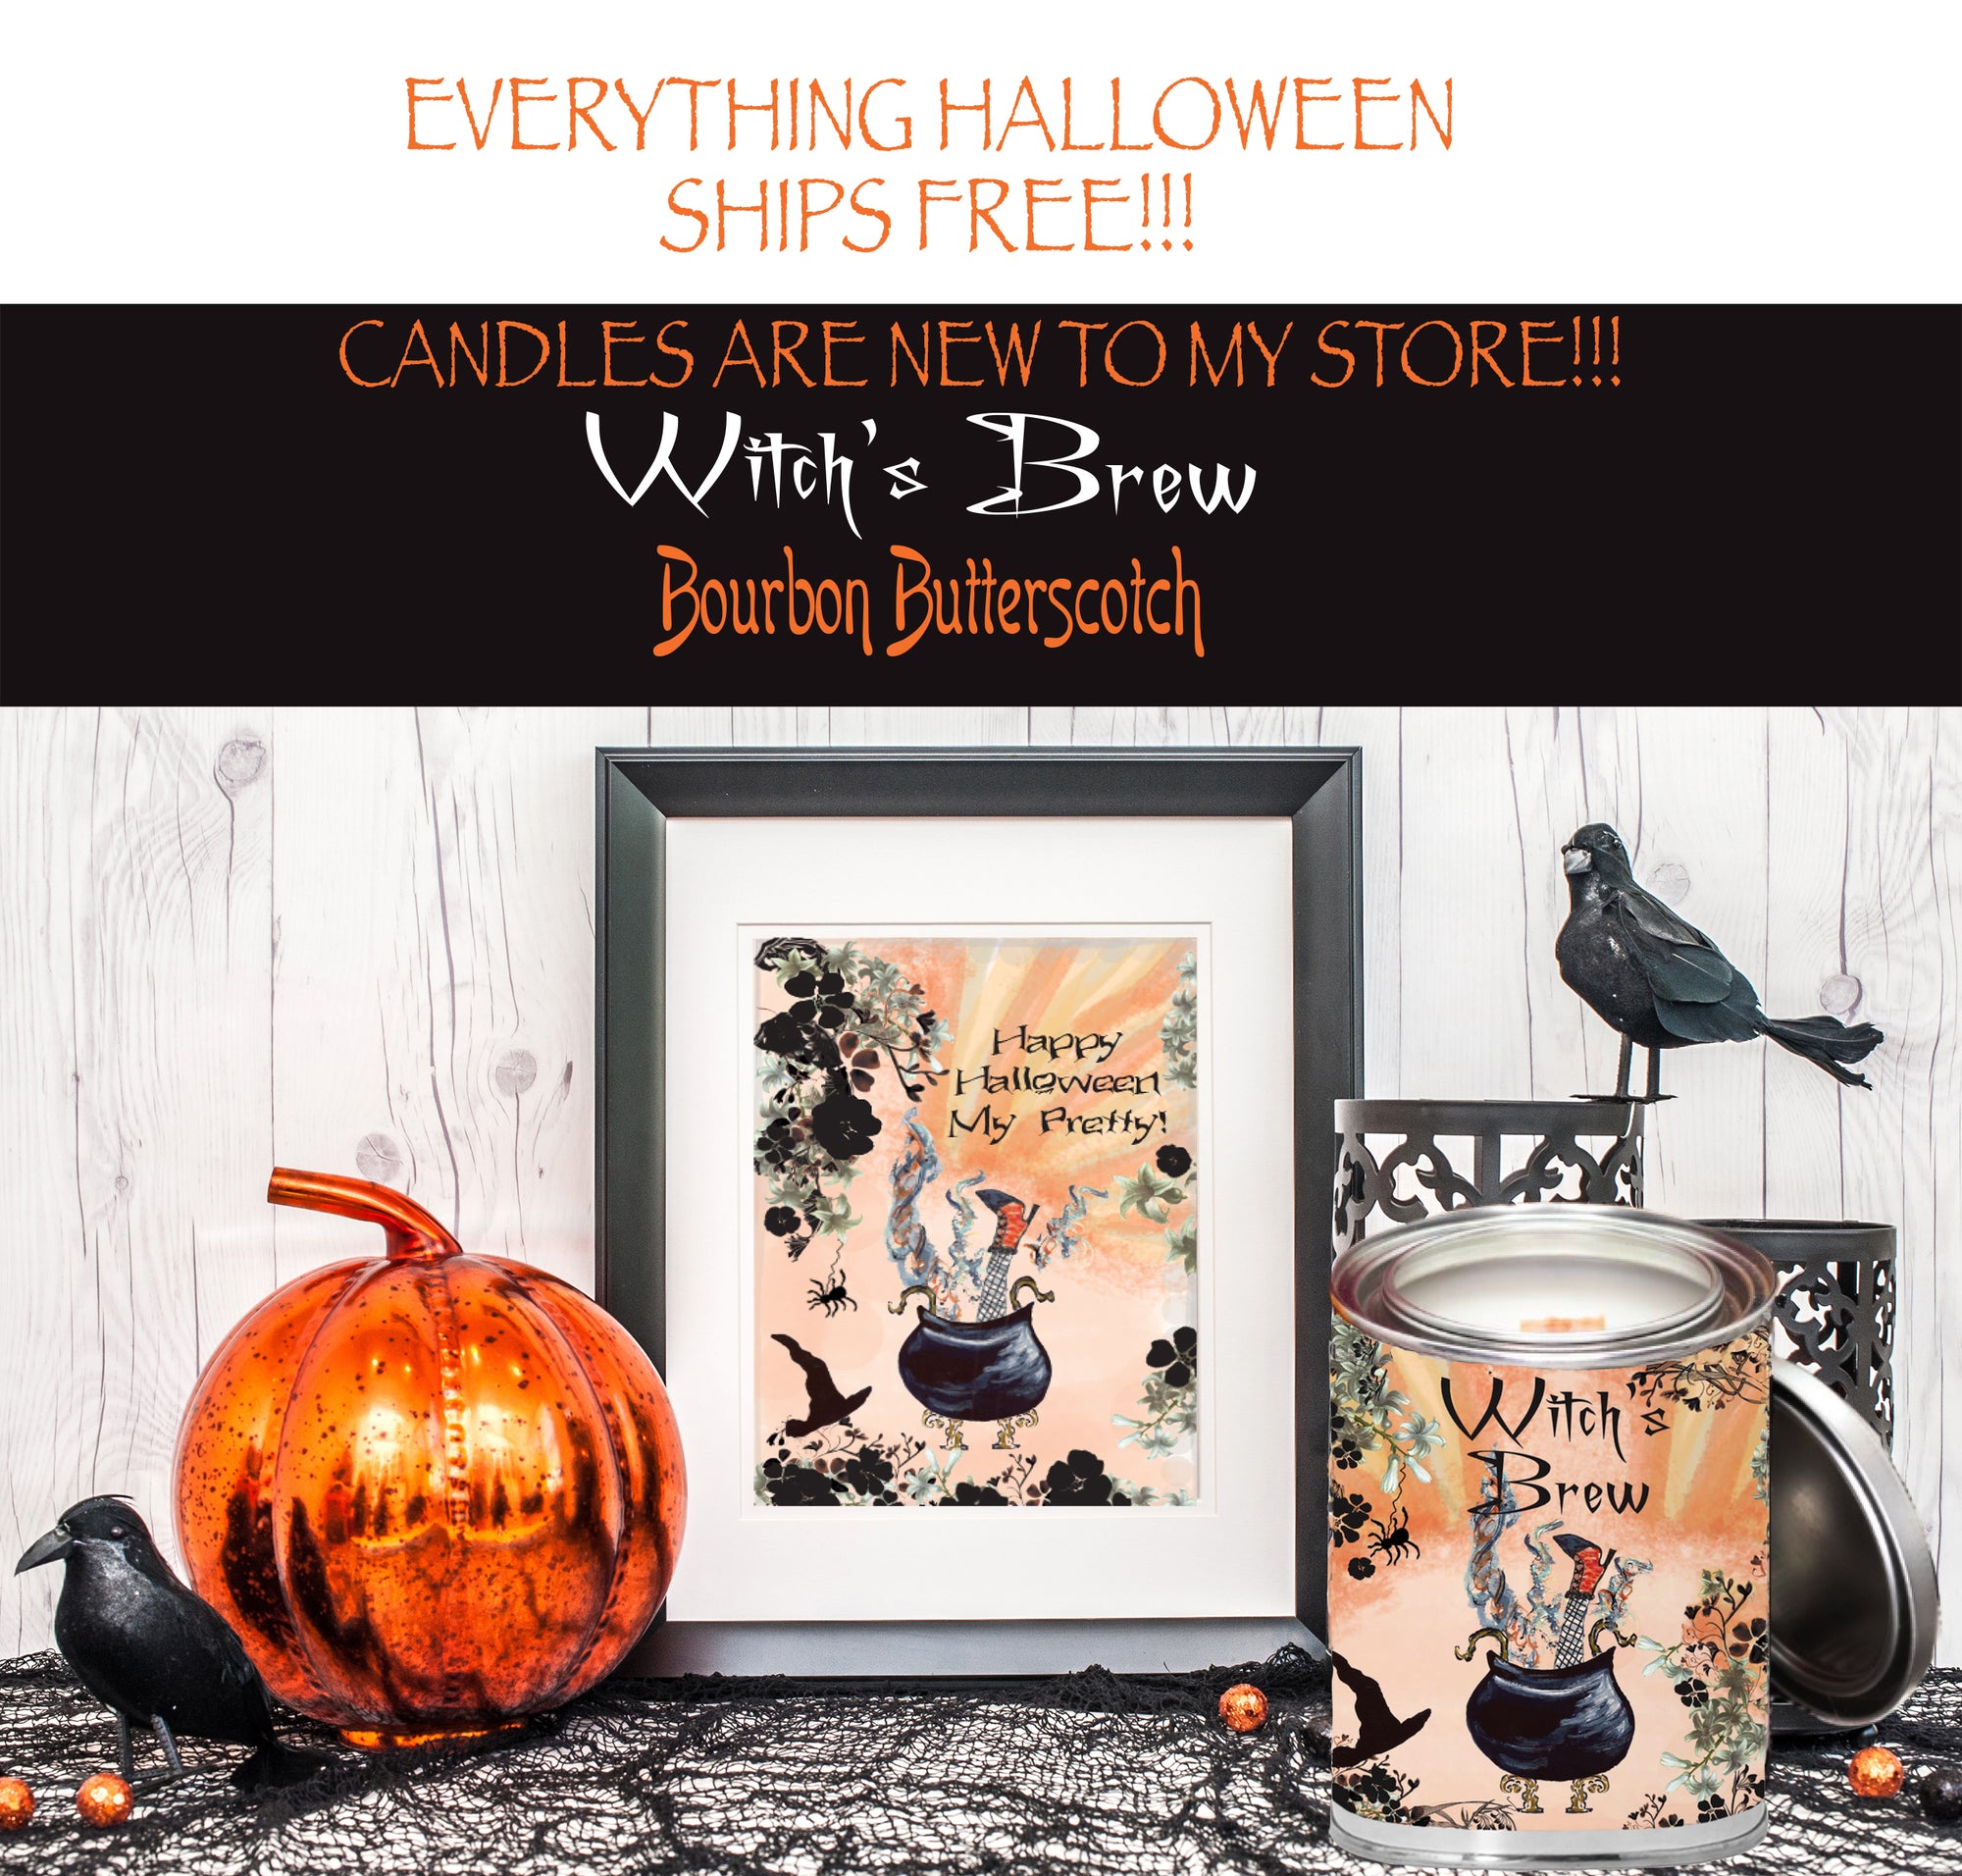 SHOP OUR HALLOWEEN COLLECTION!!!   New to the Store Clean Burning Candles in Scents like Bourbon Butterscotch and Caramel Apple!  CANDLES SHIP FREE!